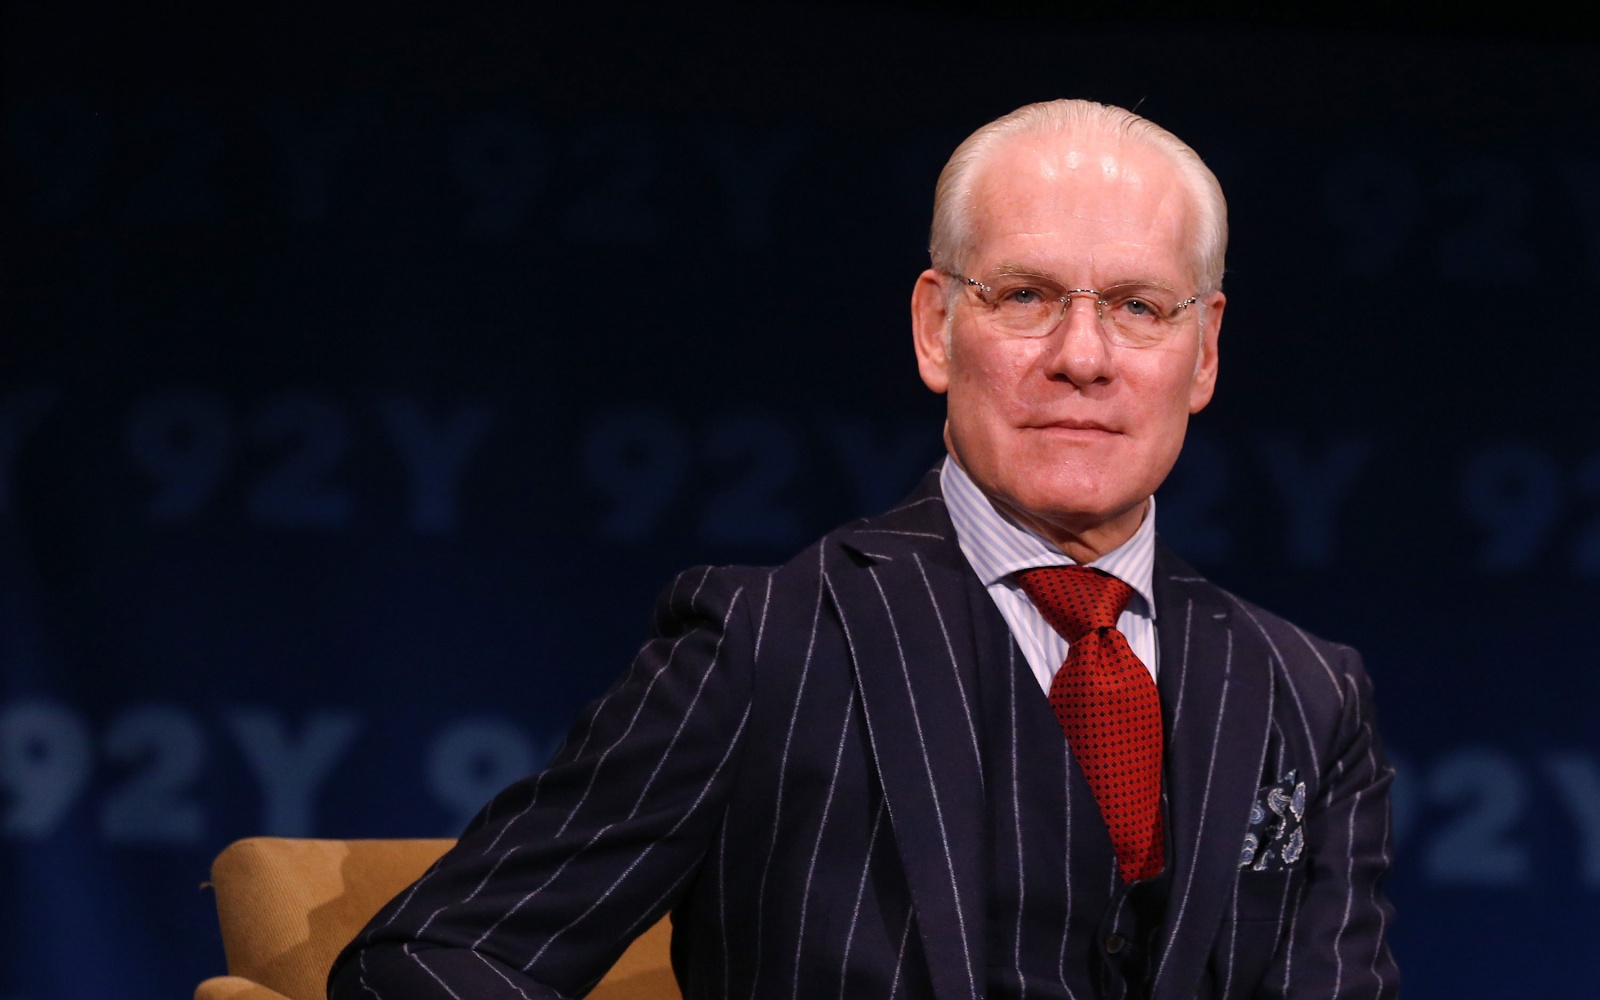 Travel Tips from Tim Gunn of Project Runway